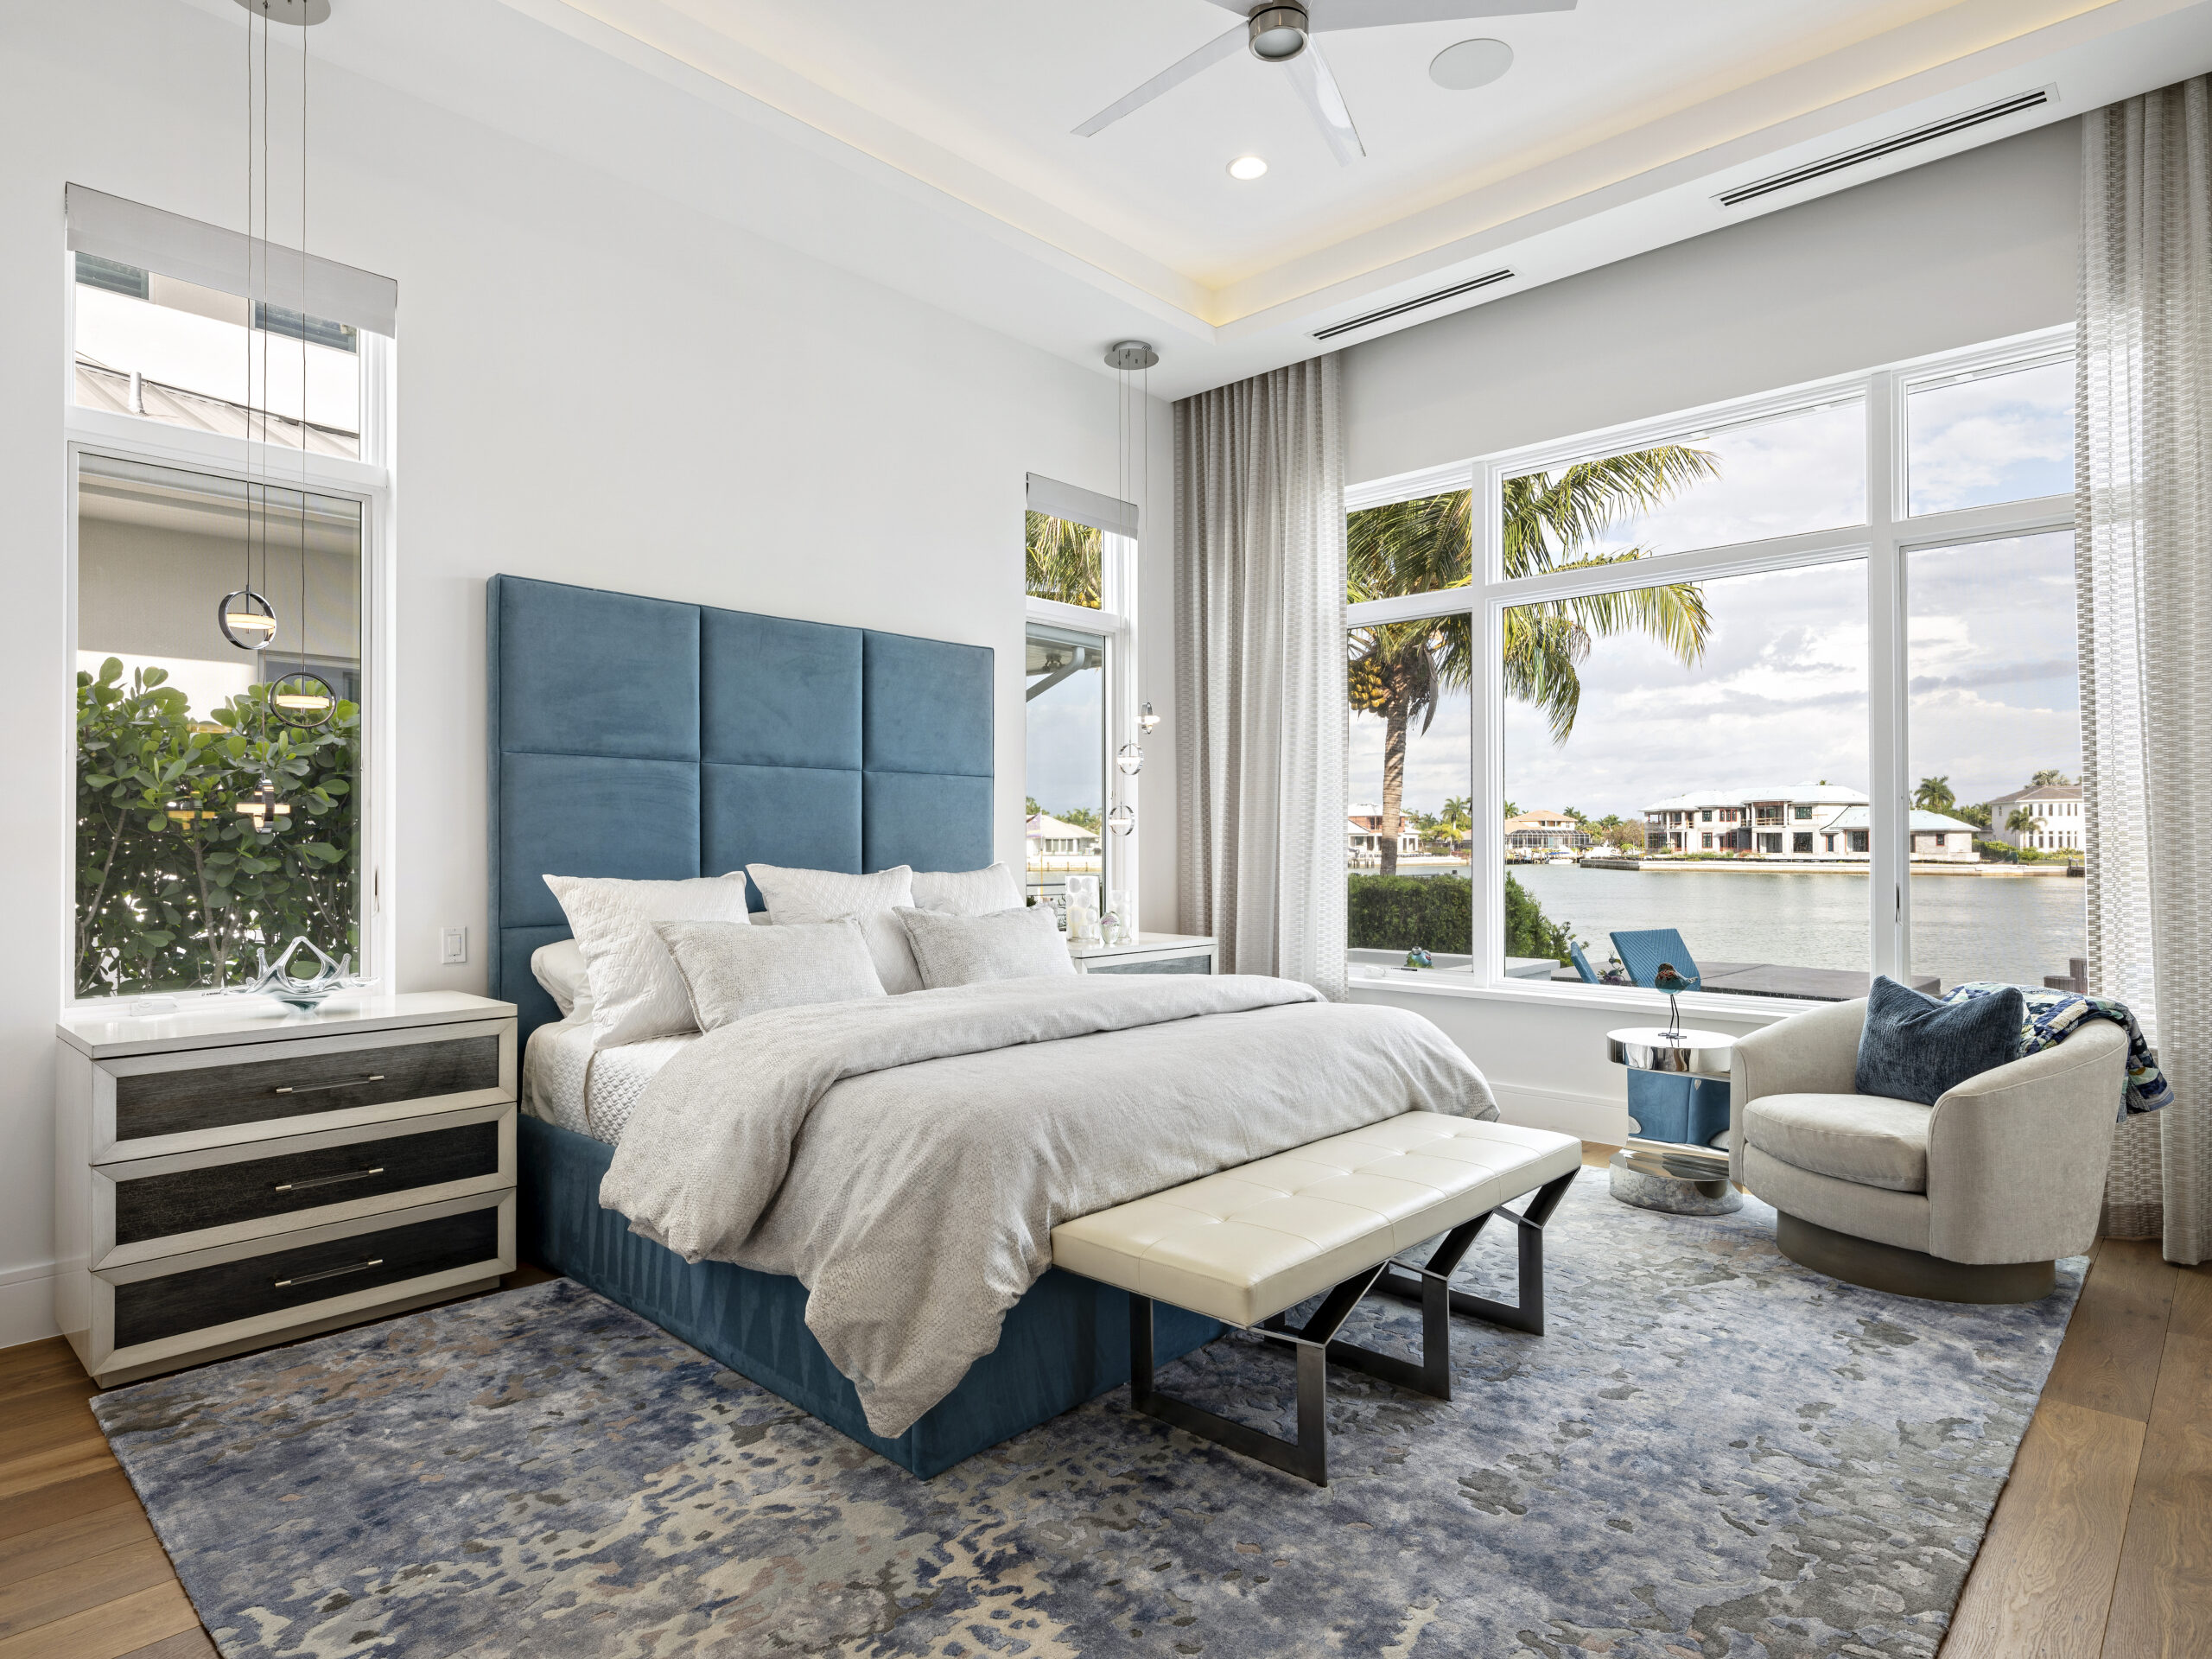 Image of luxury bedroom to convey property management Marco Island